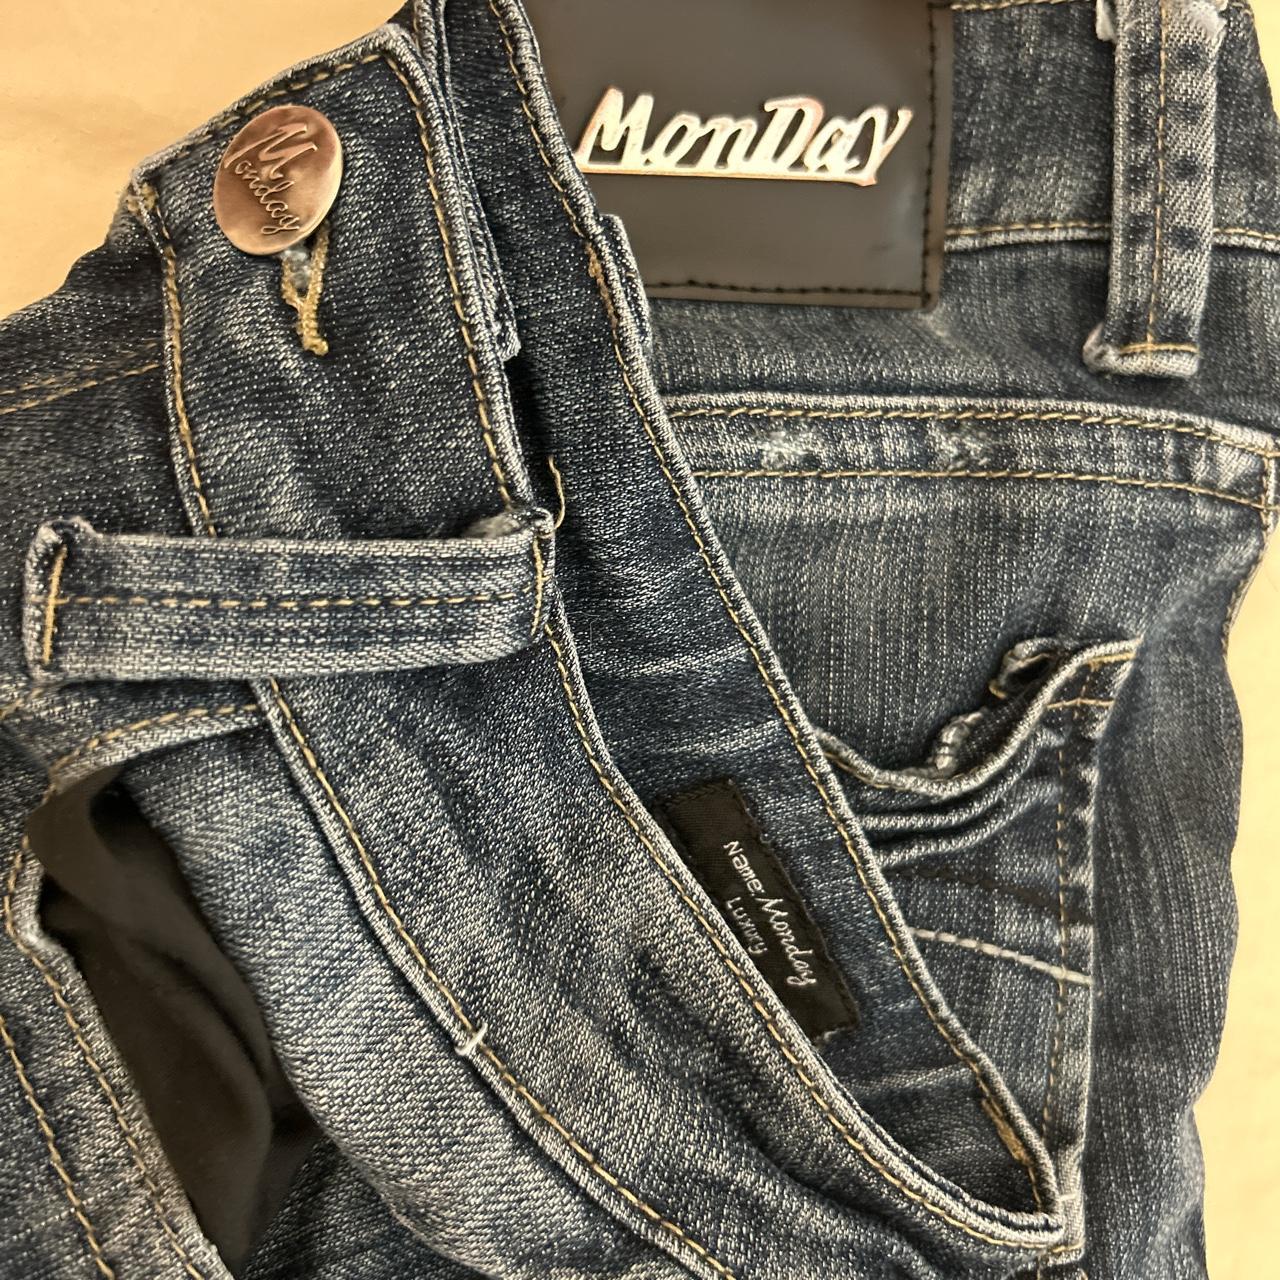 og deadstock MONDAY jeans Low waisted, bootcut the... - Depop